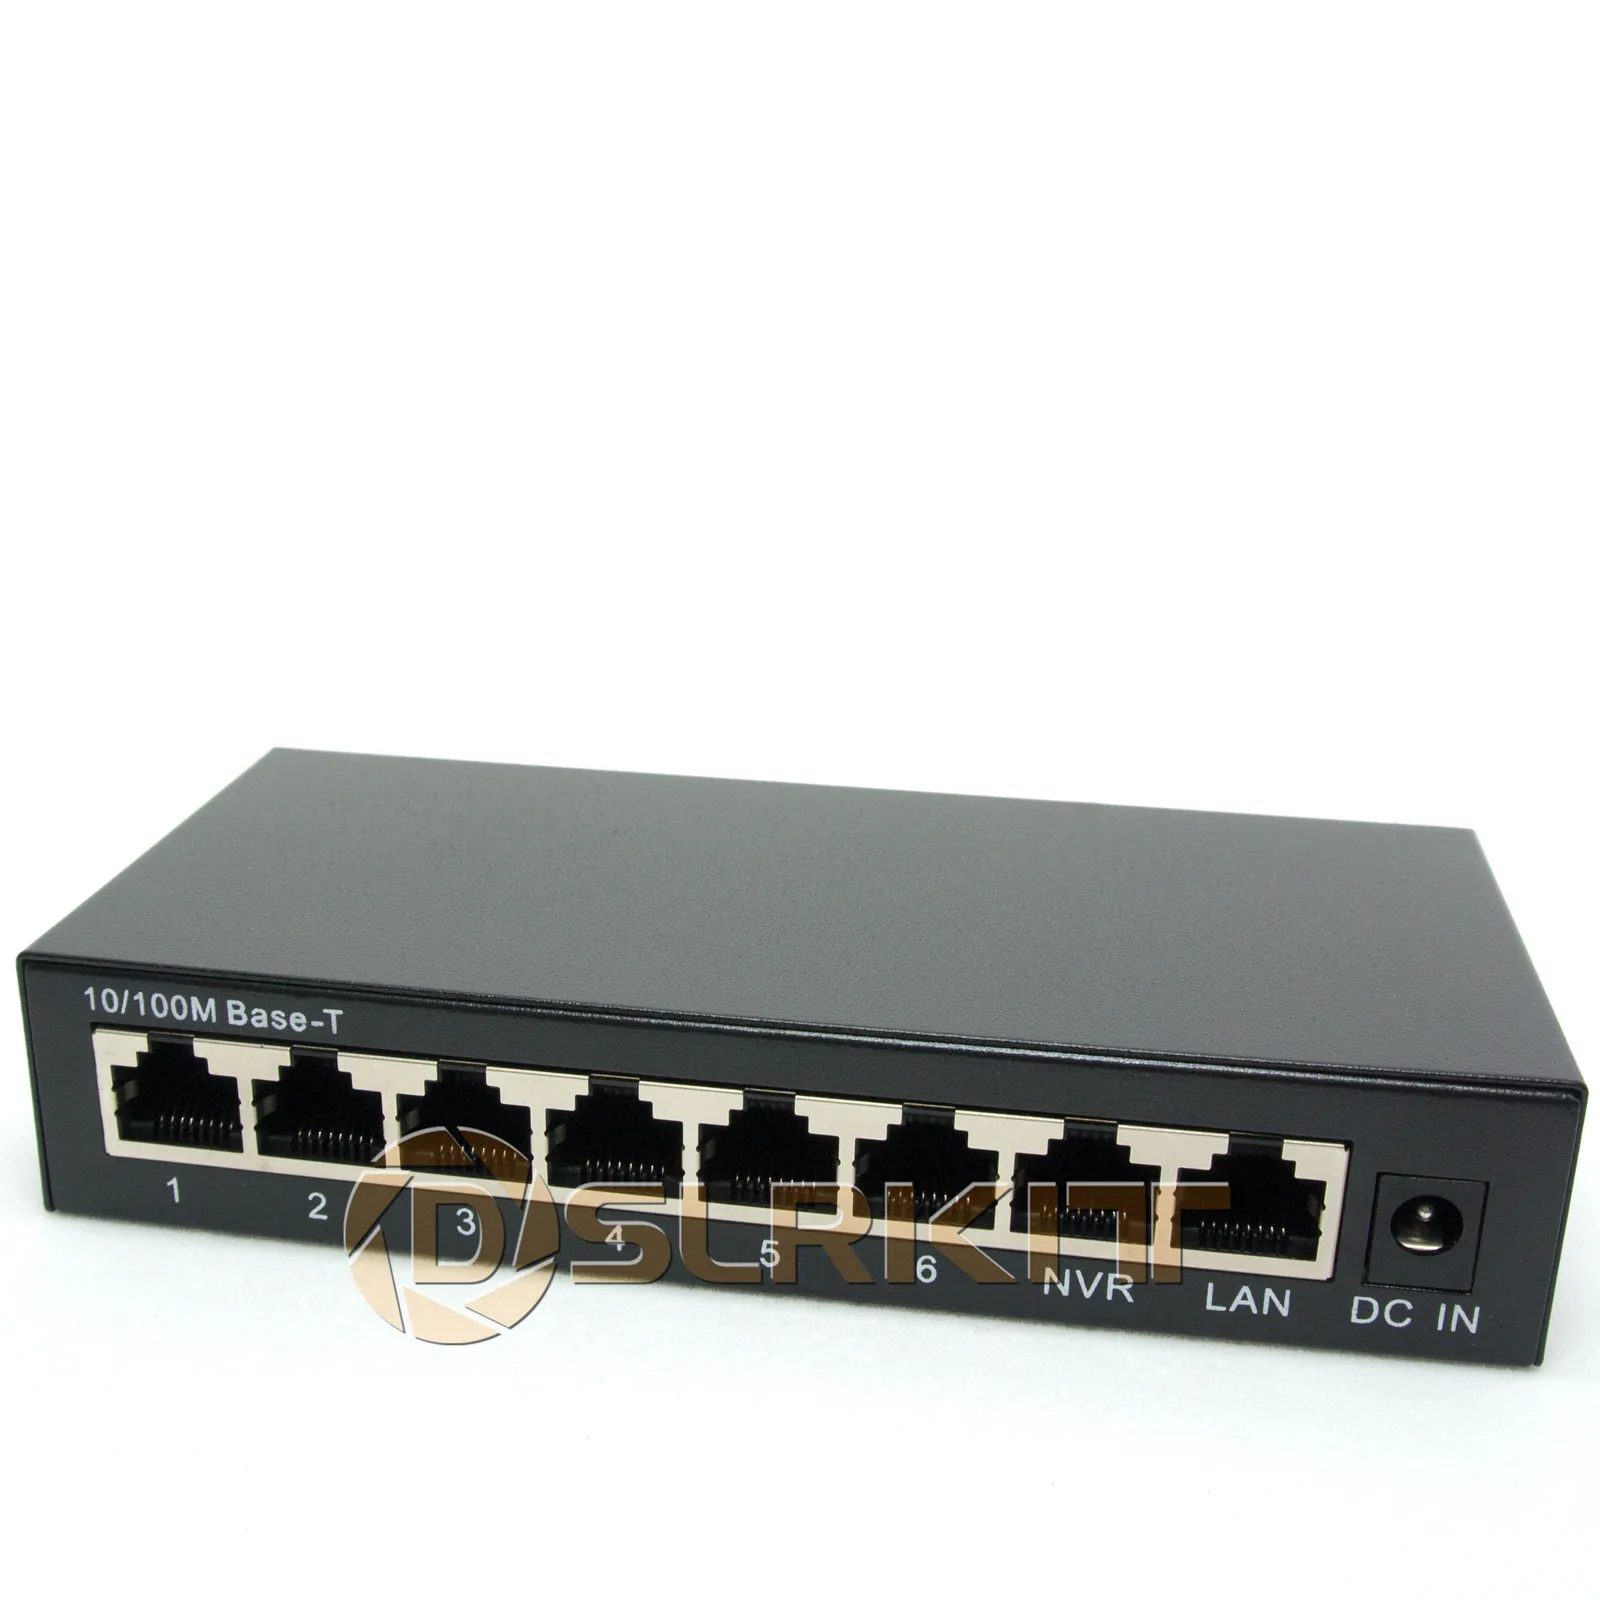 AEA0 8 PoE Injector Poe Network Switches POE Switch Power Over Ethernet 